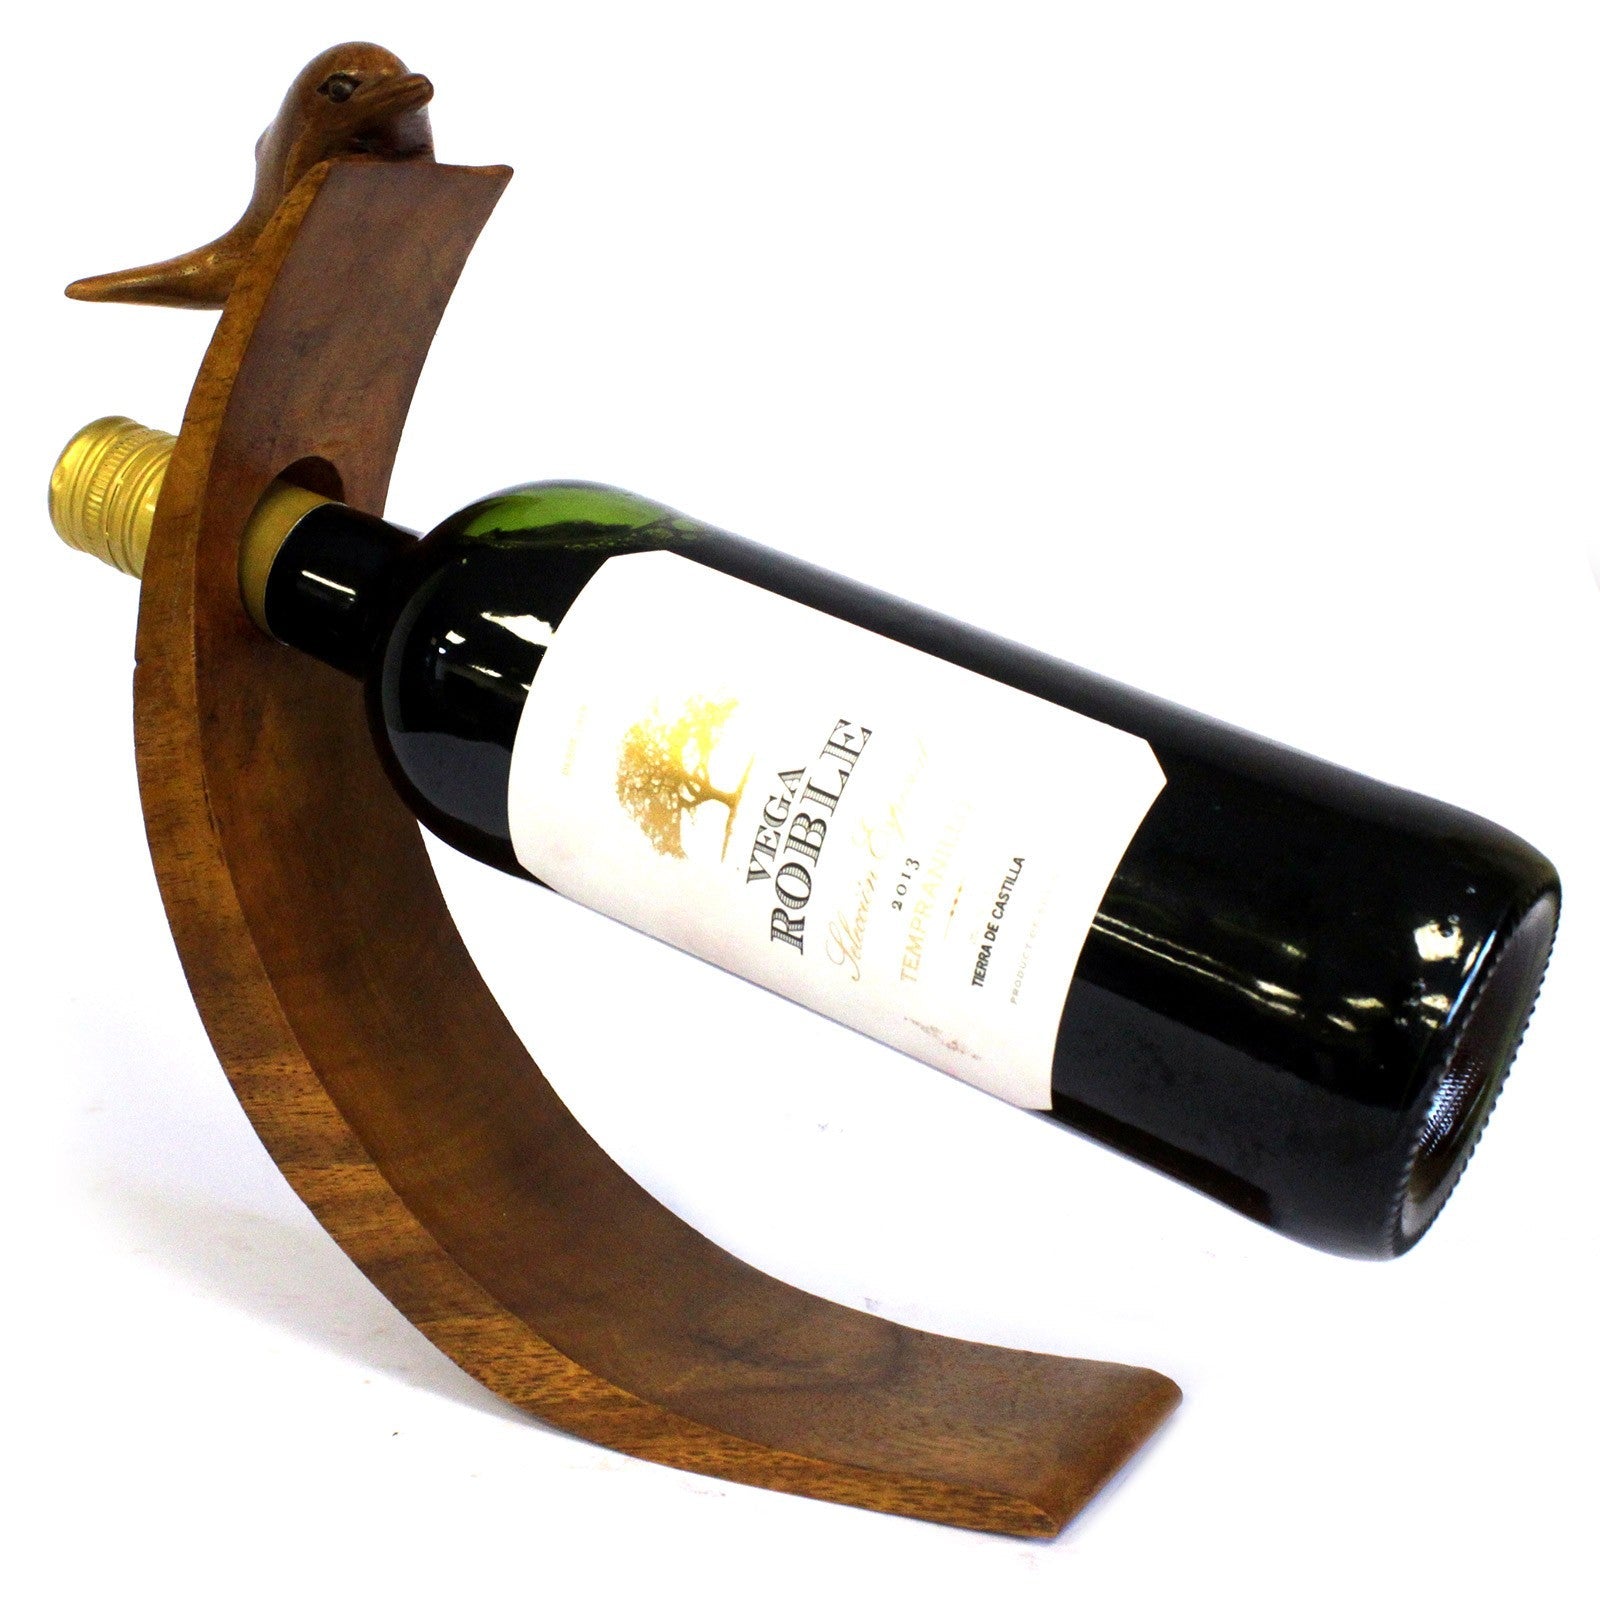 View Balance Wine Holders Dolphin information